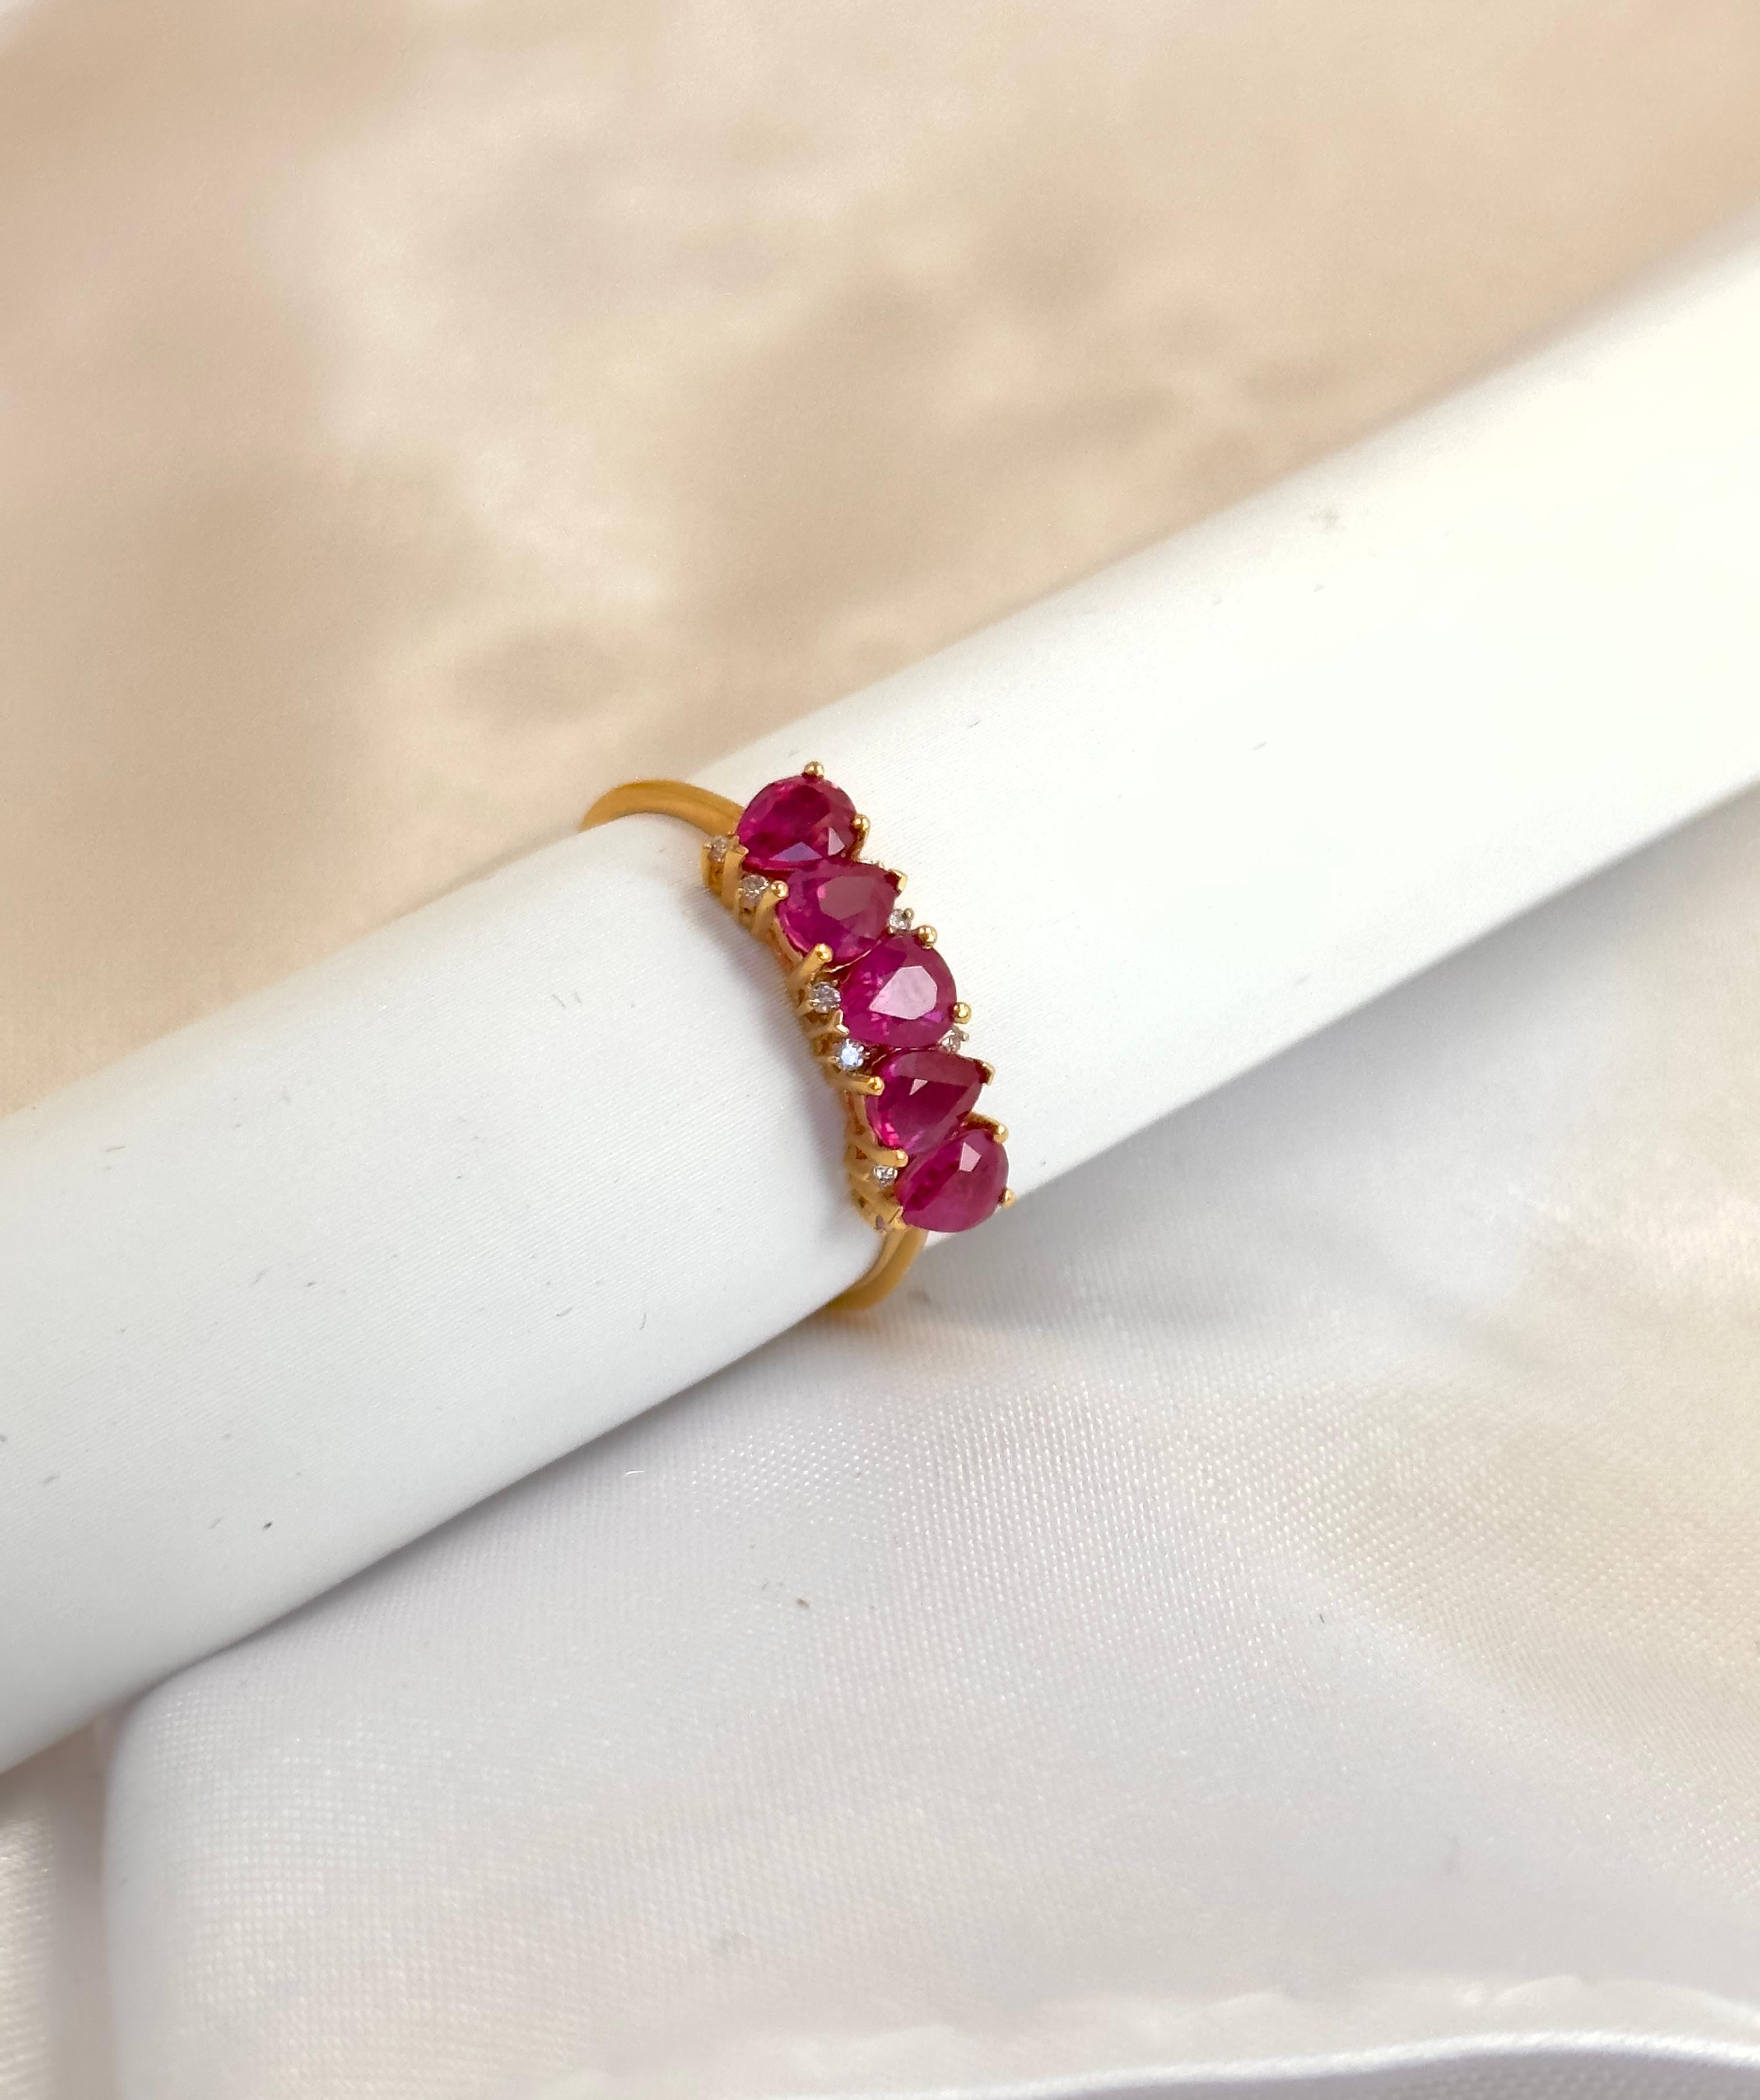 Pear shape rubies lined up next to each other in this half band ring with small diamonds! The pear shape rubies are in a forward and reverse pattern set in a basket setting ring. The smaller diamonds have their own personal basket setting in between